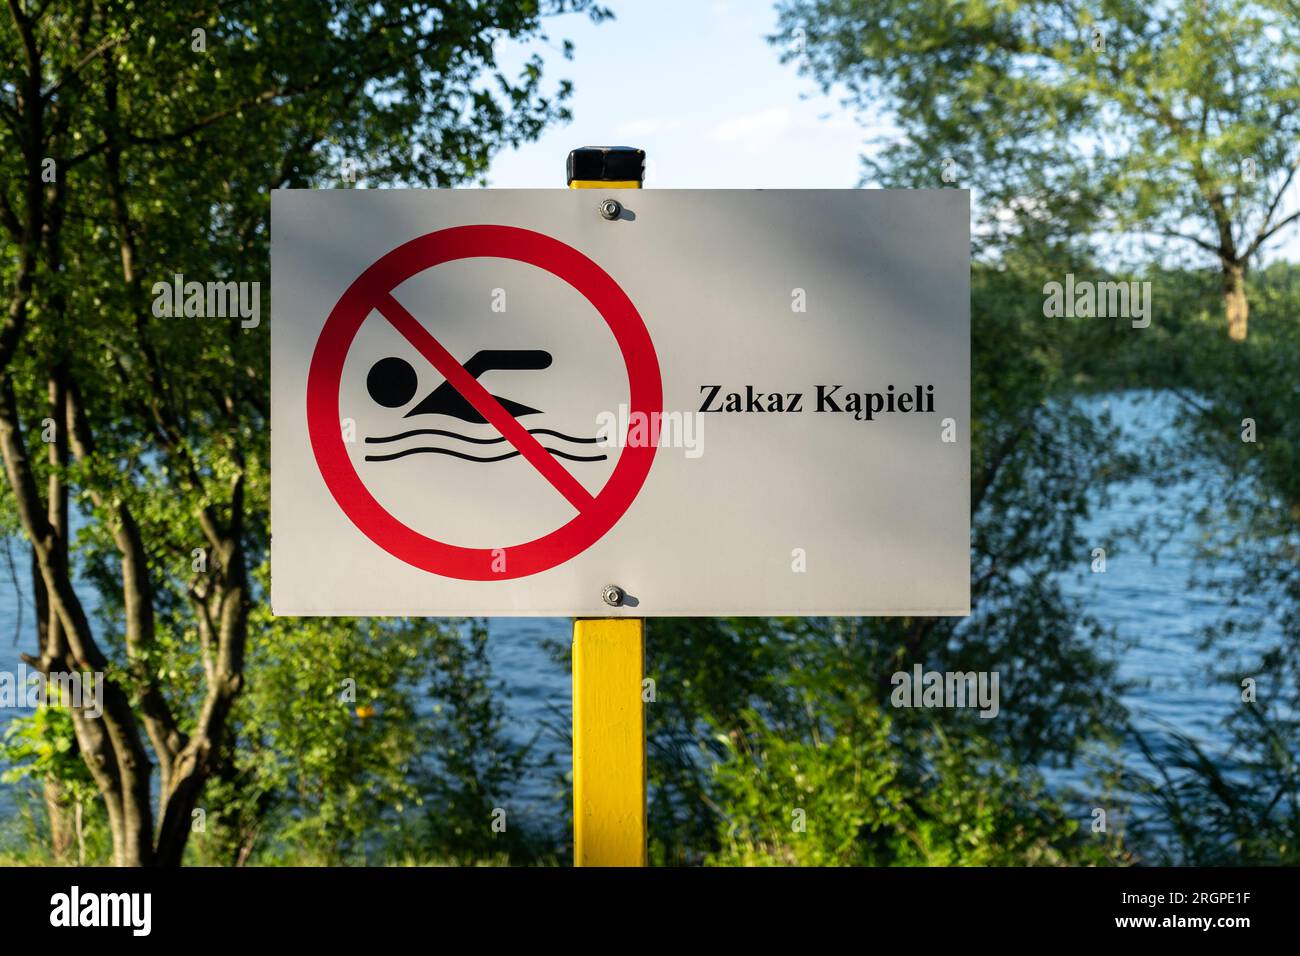 No Swimming sign post plaque. No swim area signage, mounted on water shore of lake in Poland. Text in Polish Zakaz kąpieli means Swimming prohibited. Stock Photo